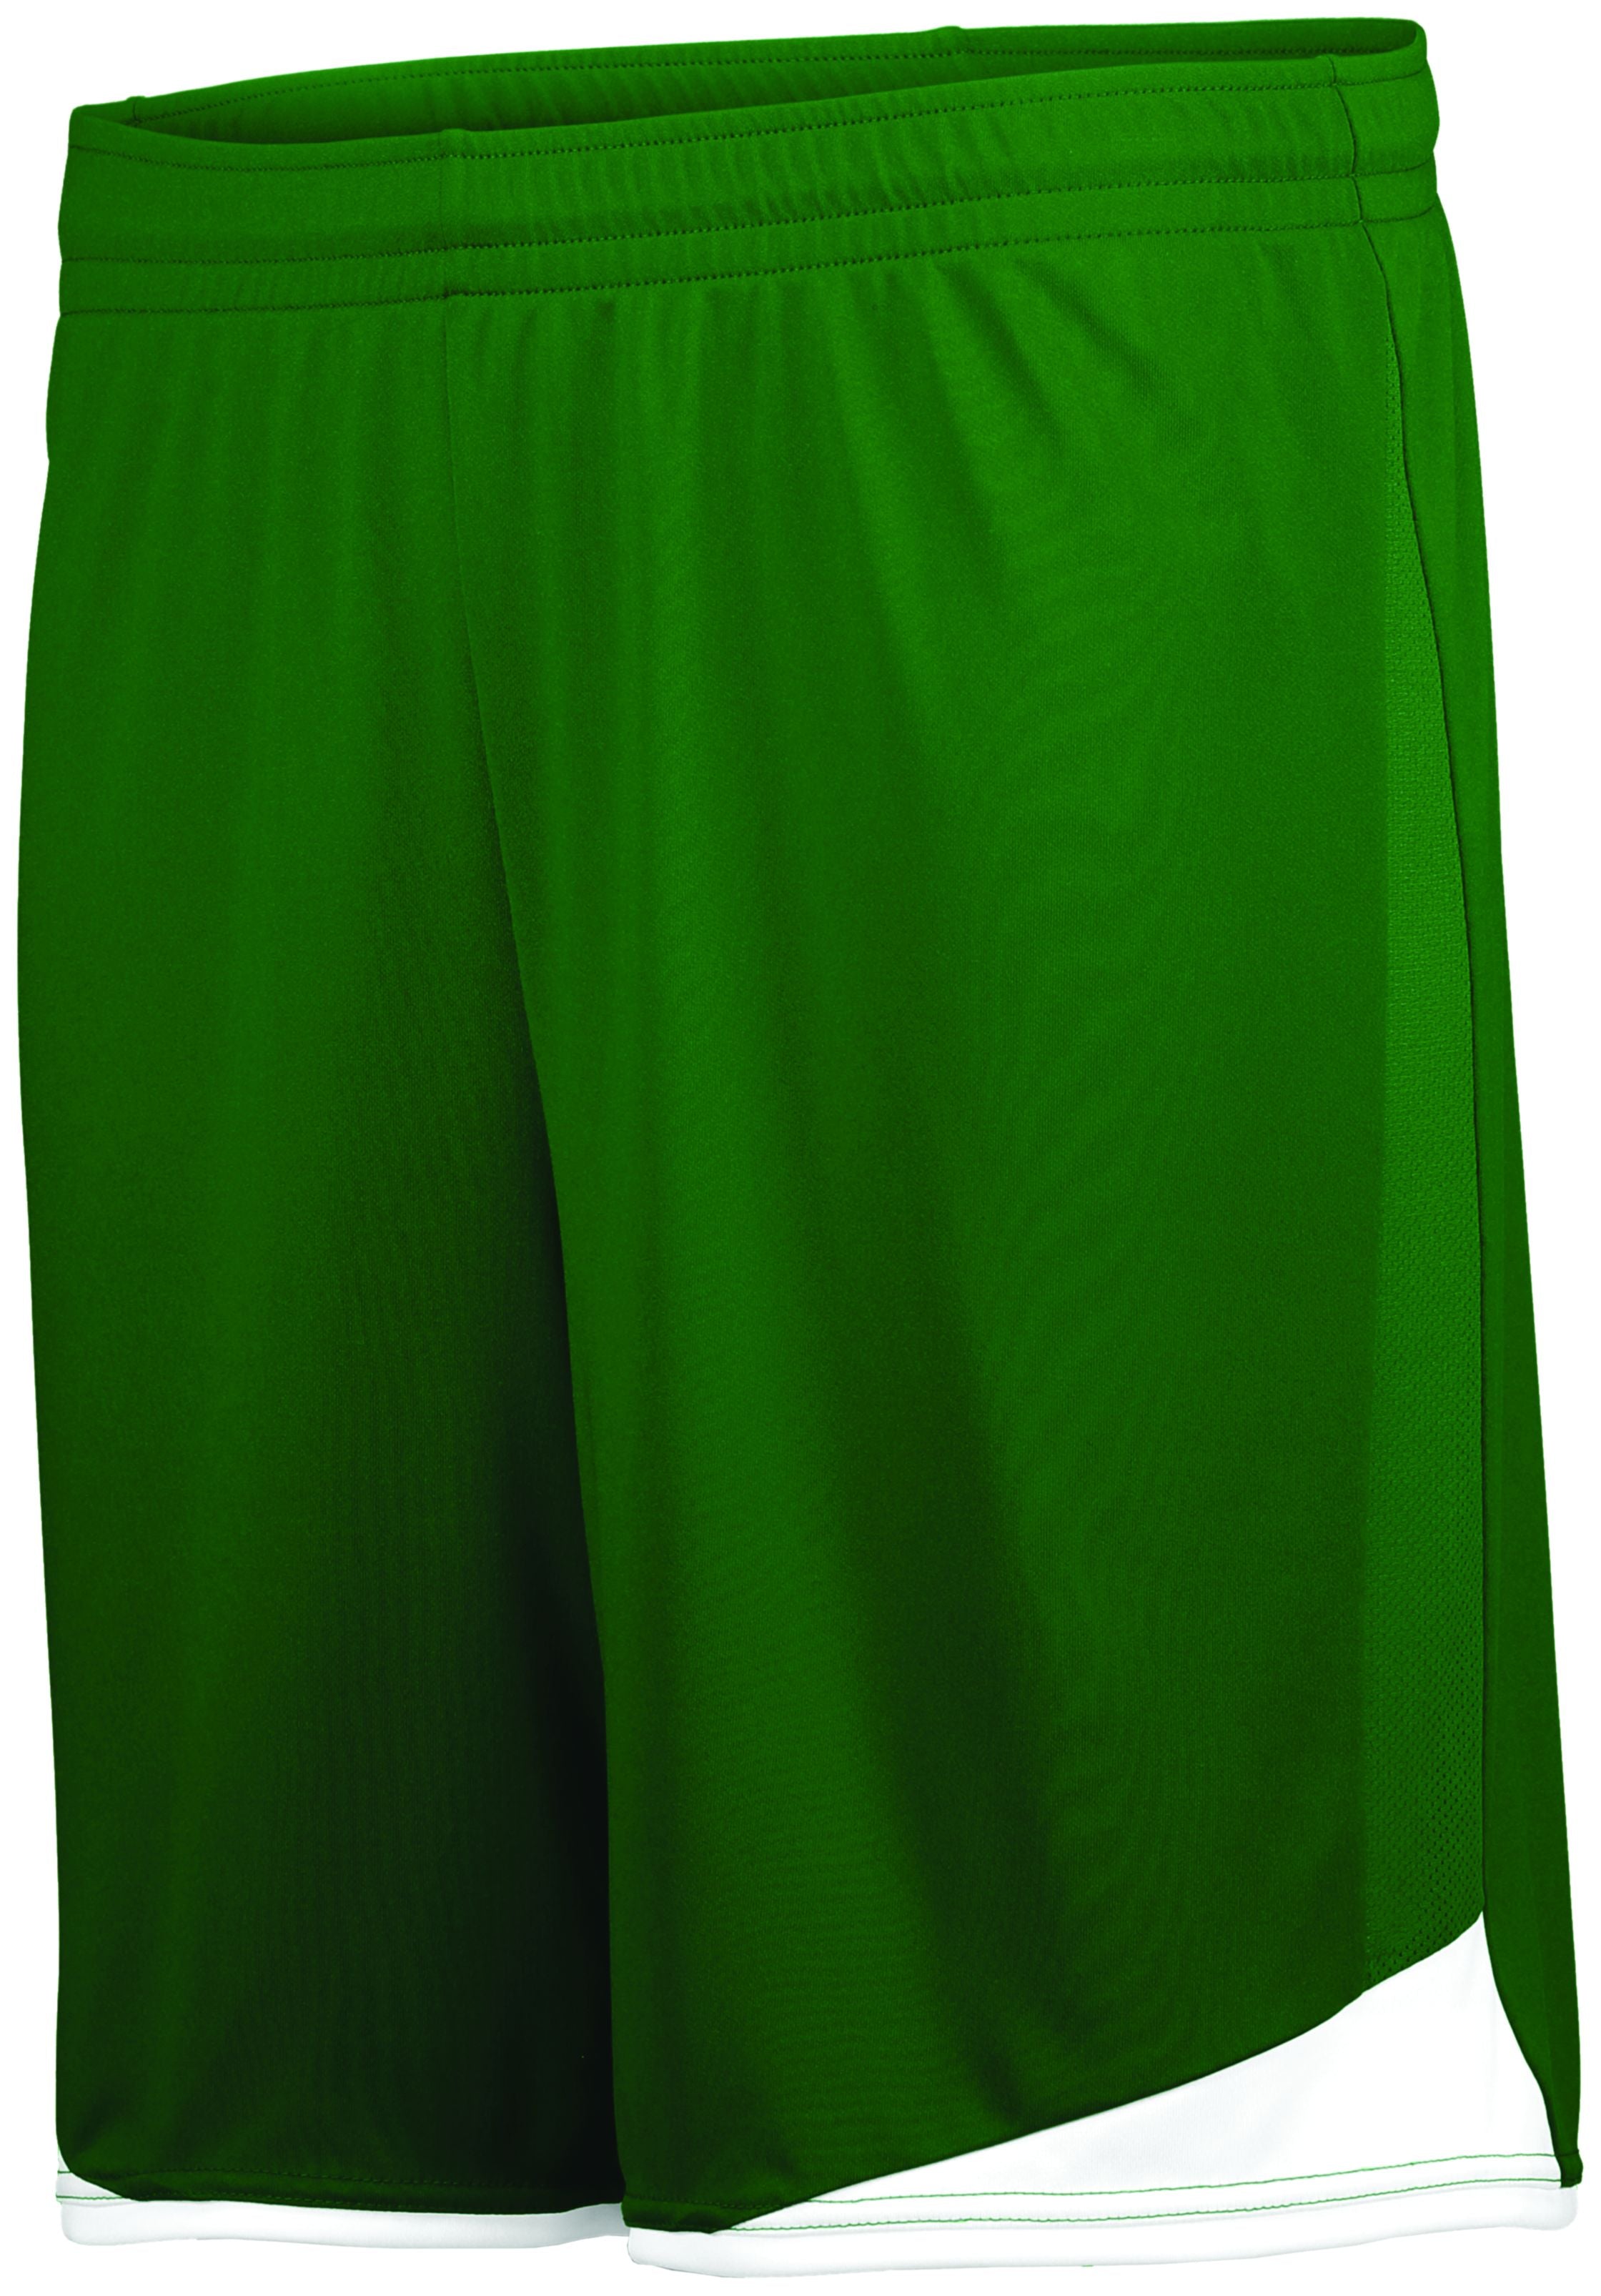 High 5 Stamford Soccer Shorts in Forest/White  -Part of the Adult, Adult-Shorts, High5-Products, Soccer, All-Sports-1 product lines at KanaleyCreations.com